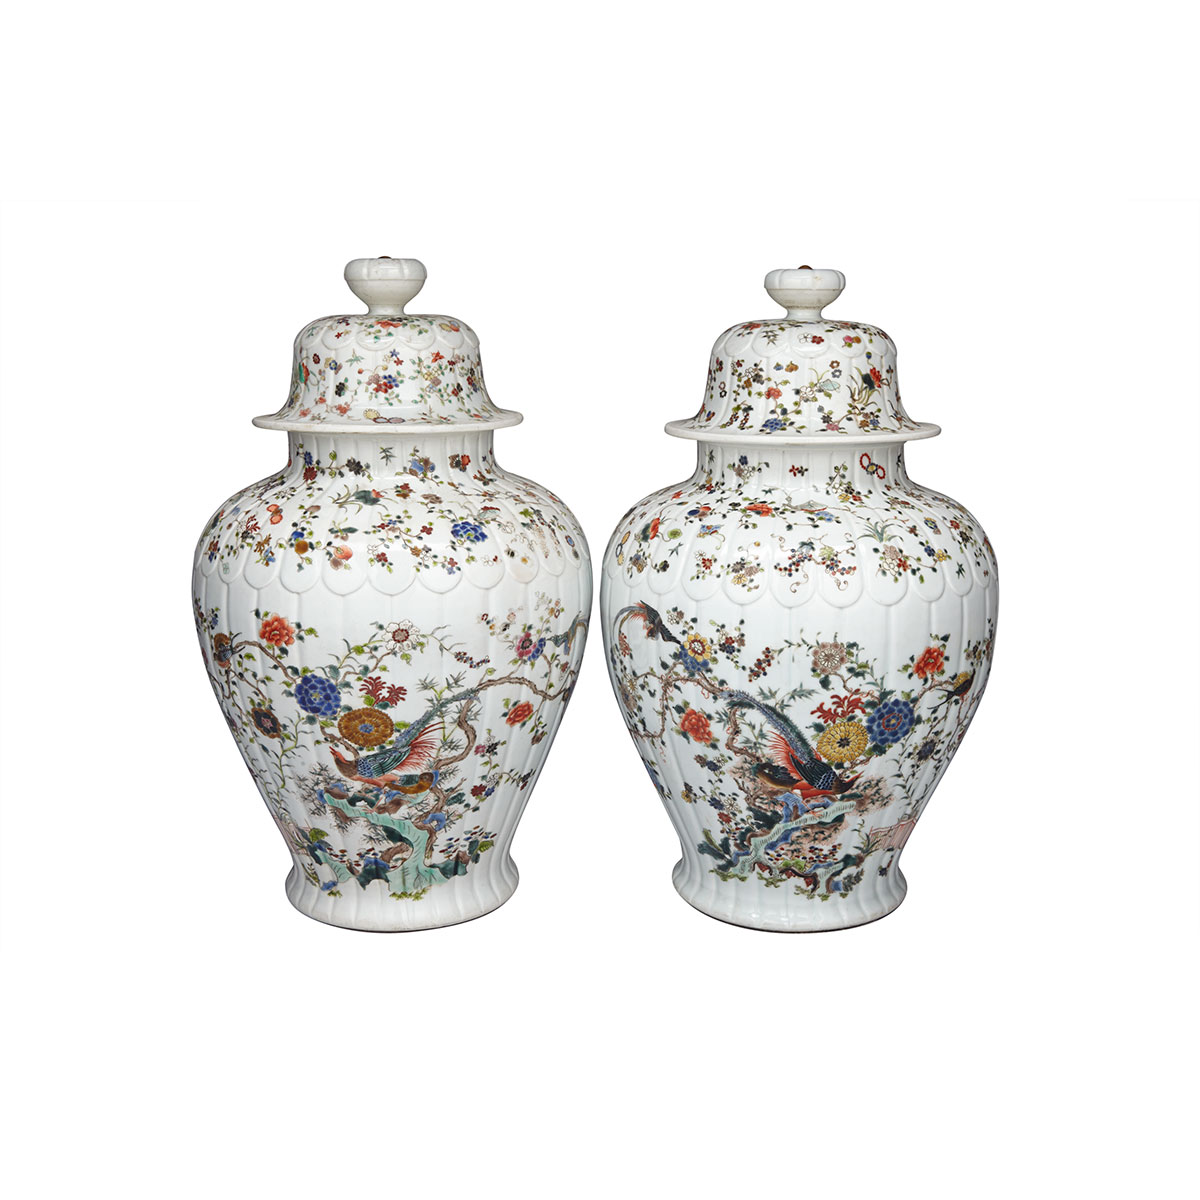 Pair of Export Famille Rose Moulded Baluster Vases and Covers